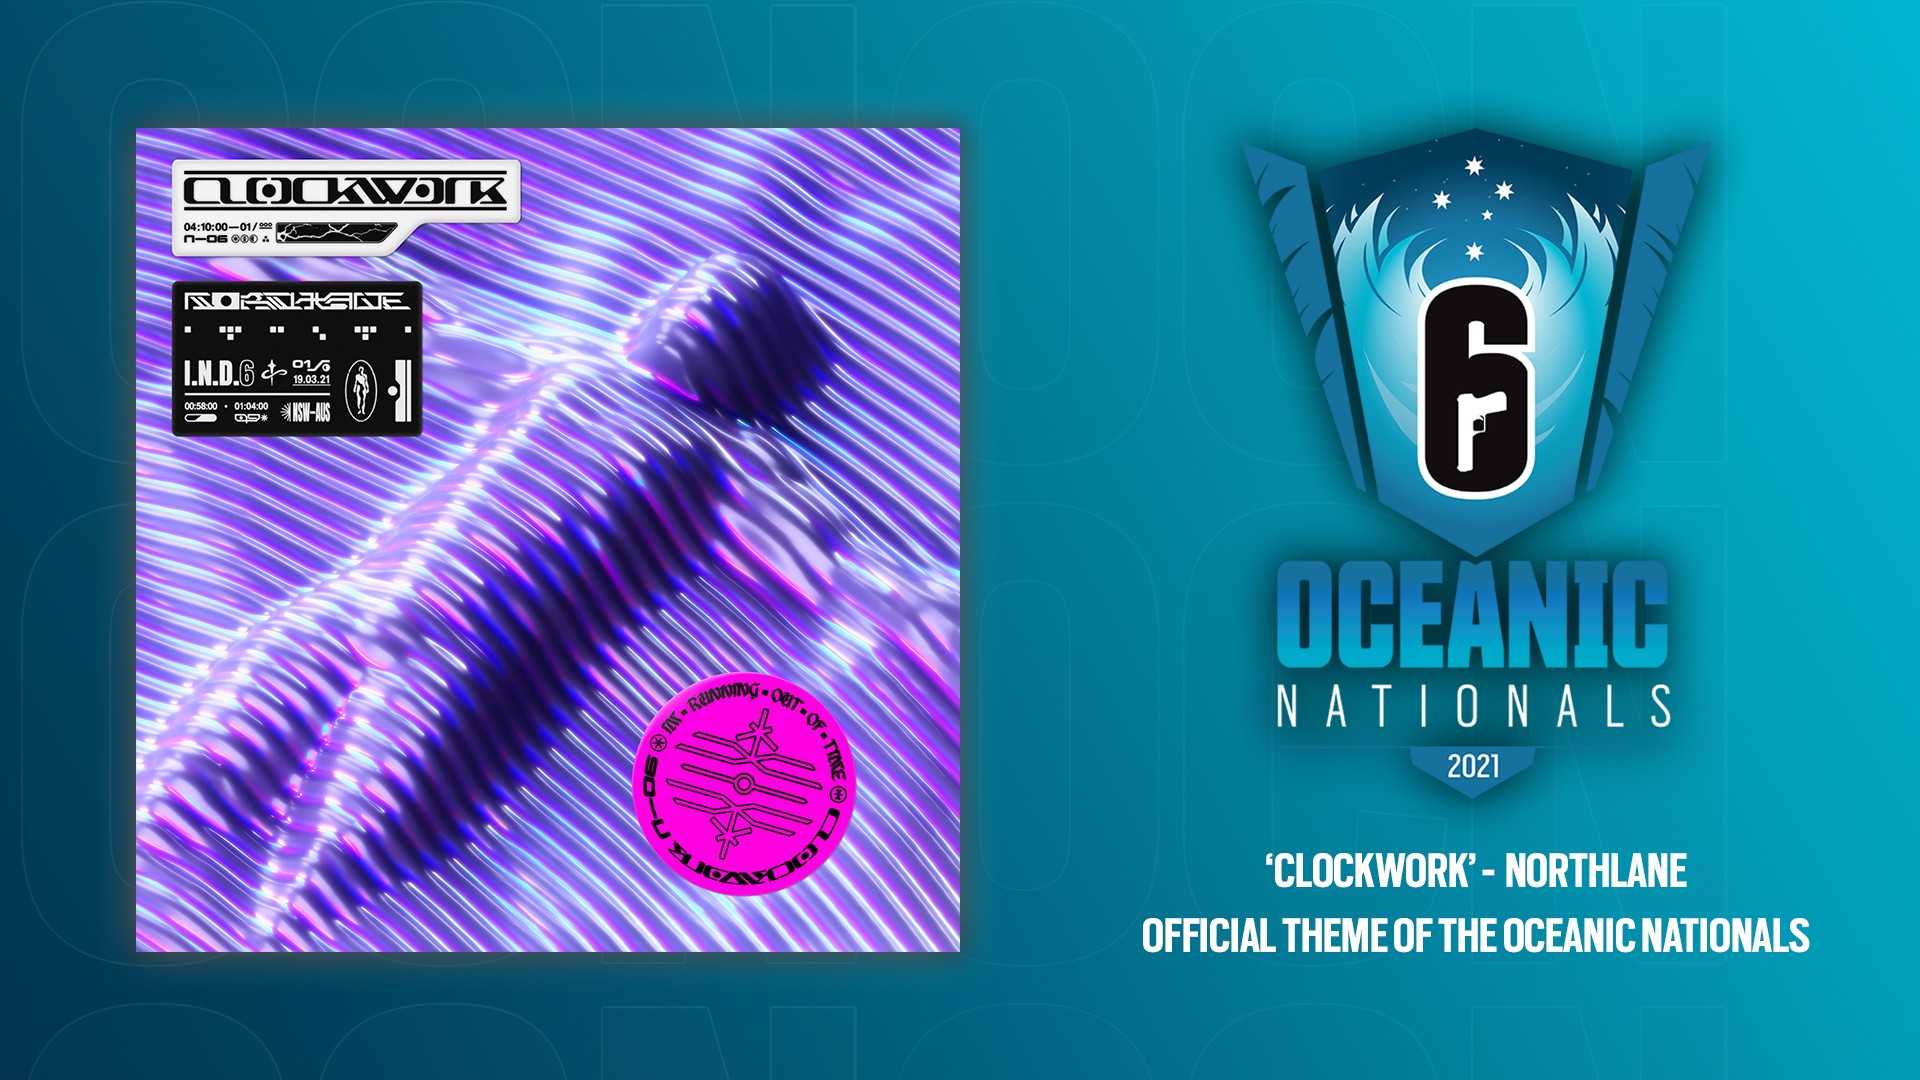 Ubisoft Announces ‘Clockwork’ By Northlane As The Official Theme Of The Oceanic Nationals